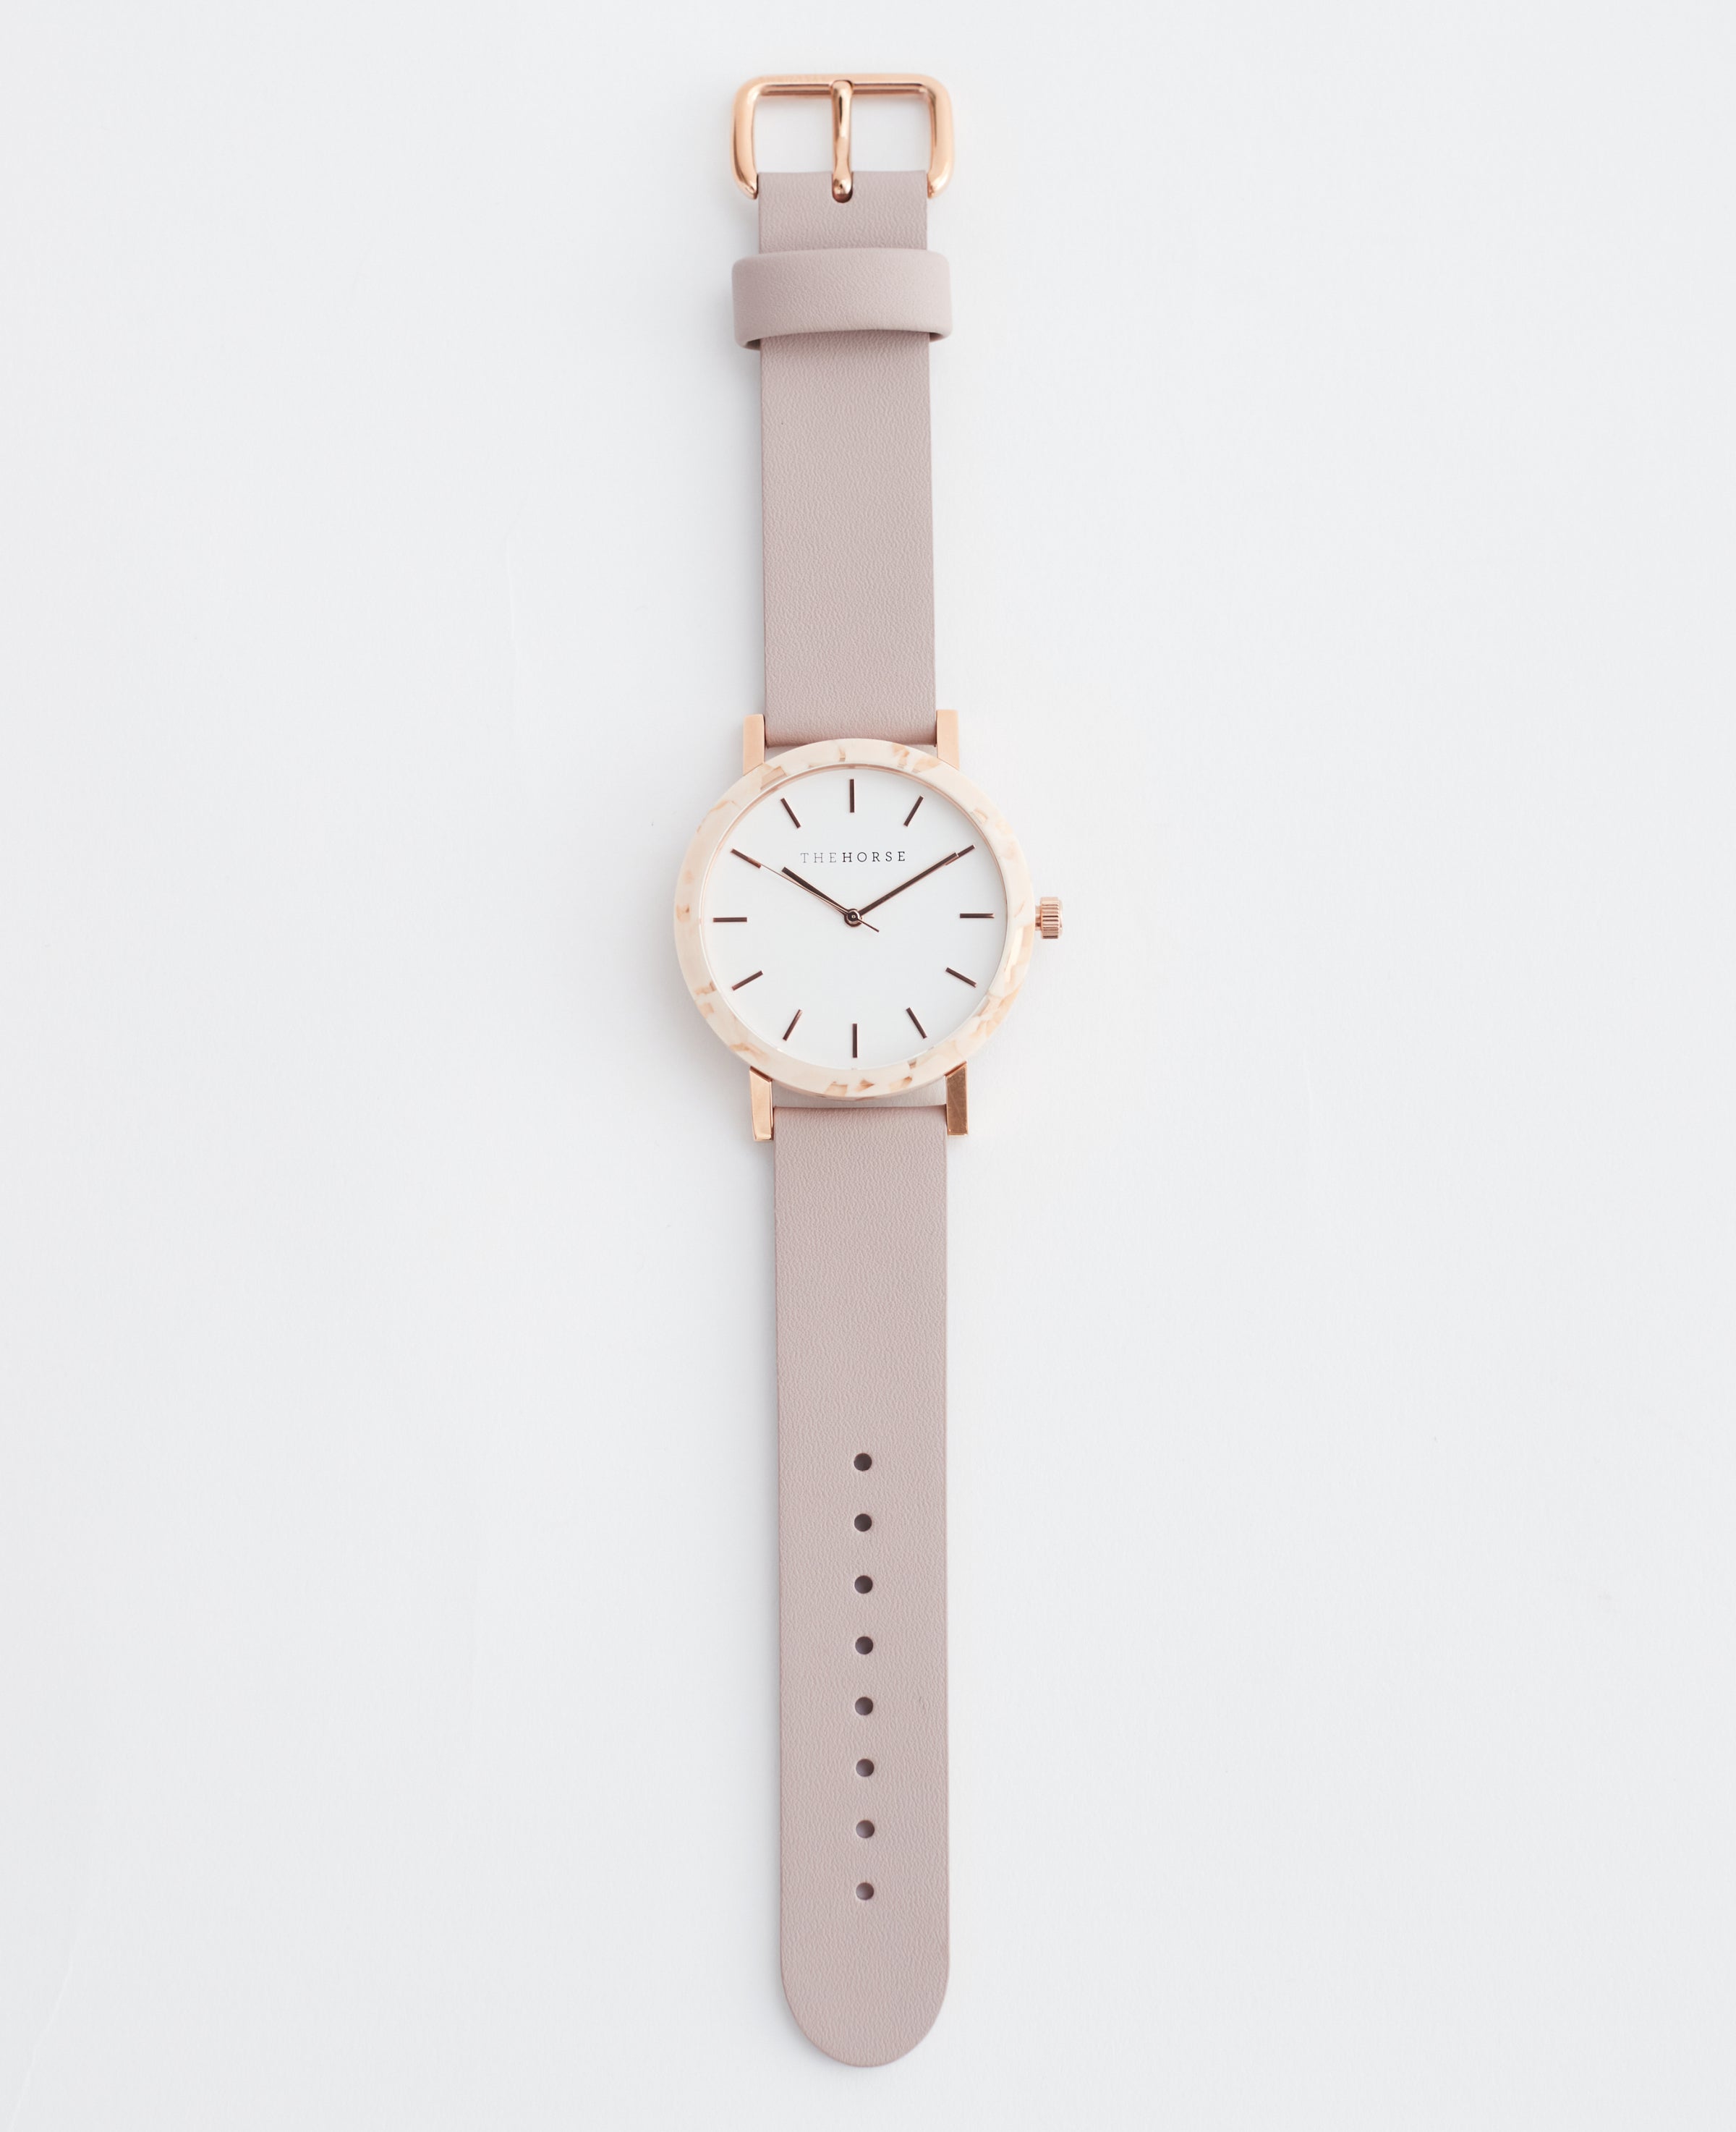 The Resin: Peach Speckle Case / White Dial / Rose Gold Indexing / Blush Leather